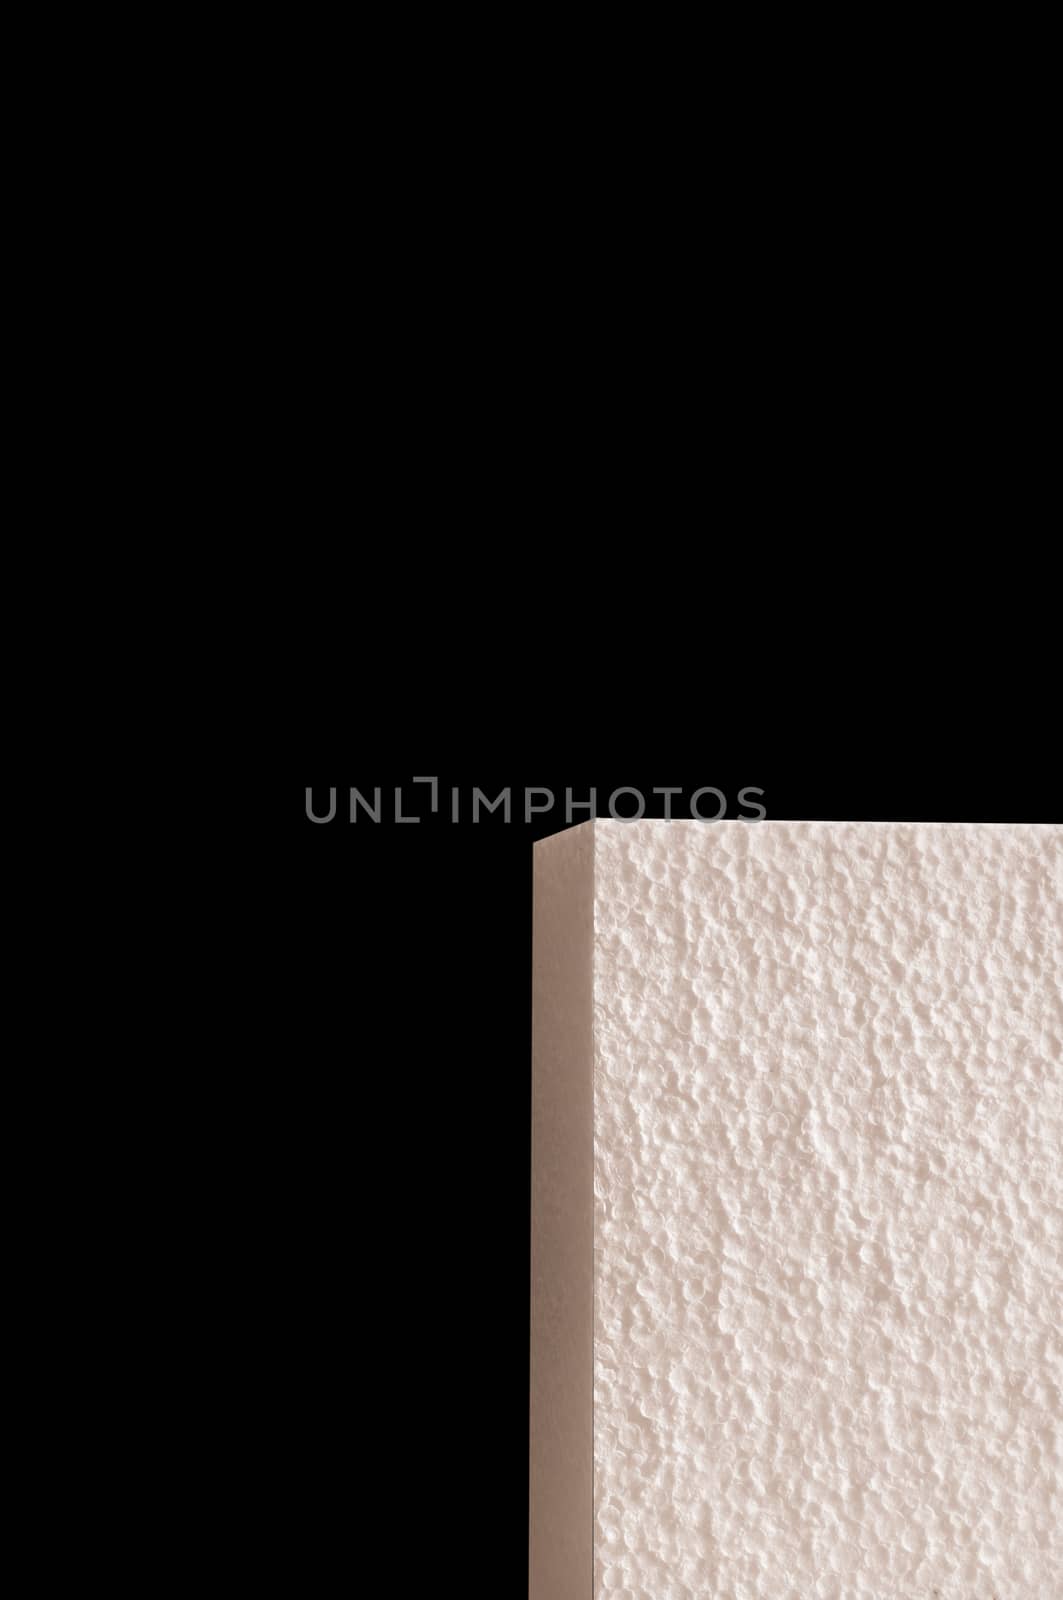 Abstract background with a light pink rectangular three-dimensional figure on a black background.